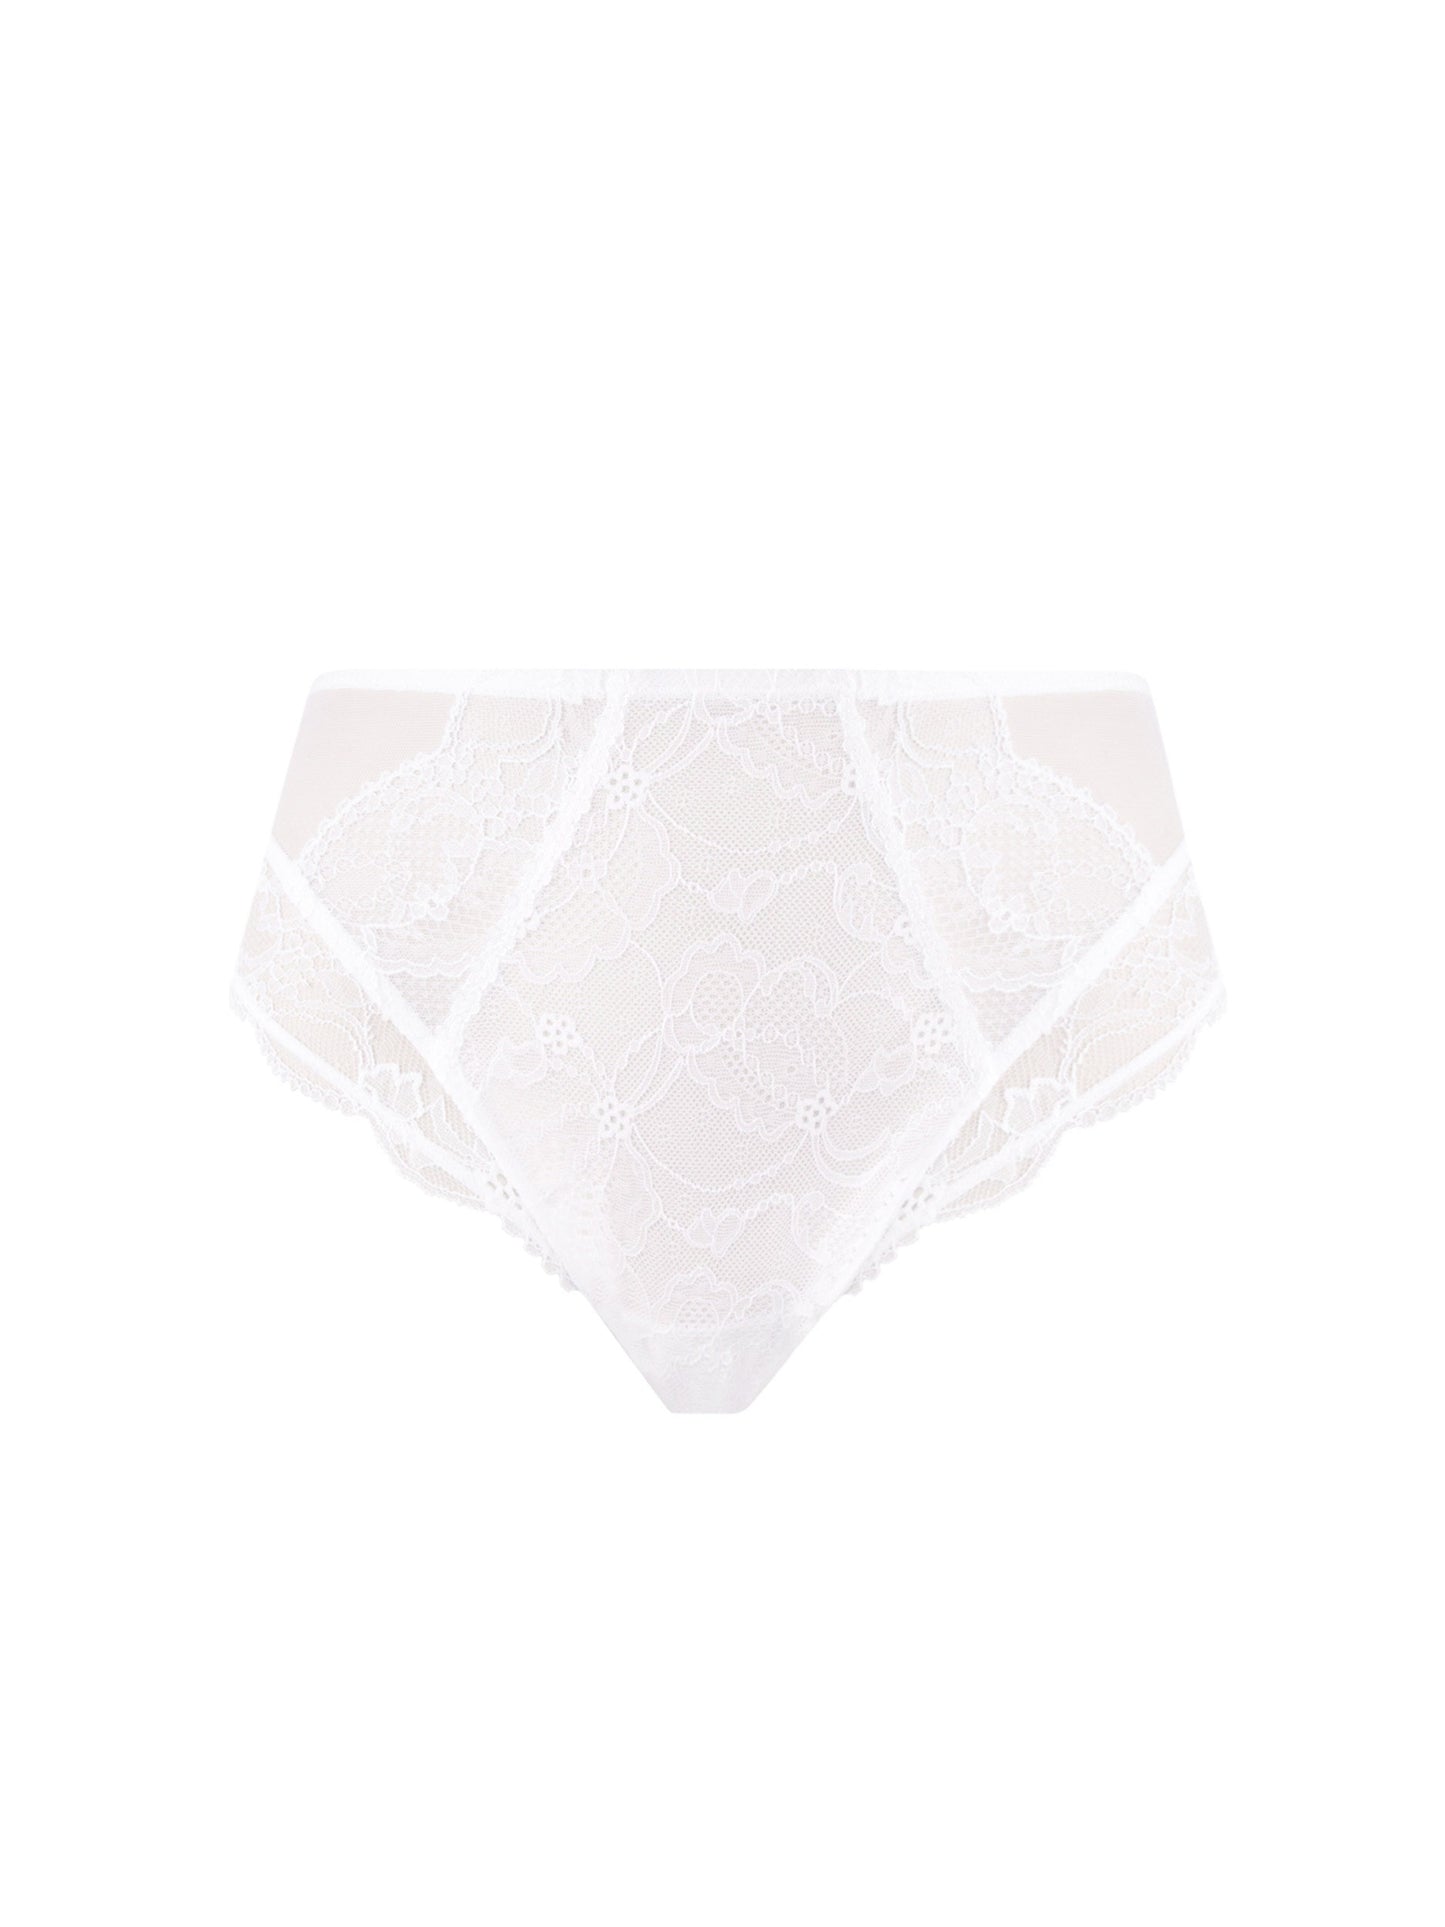 Lise Charmel Feerie Couture Full Brief